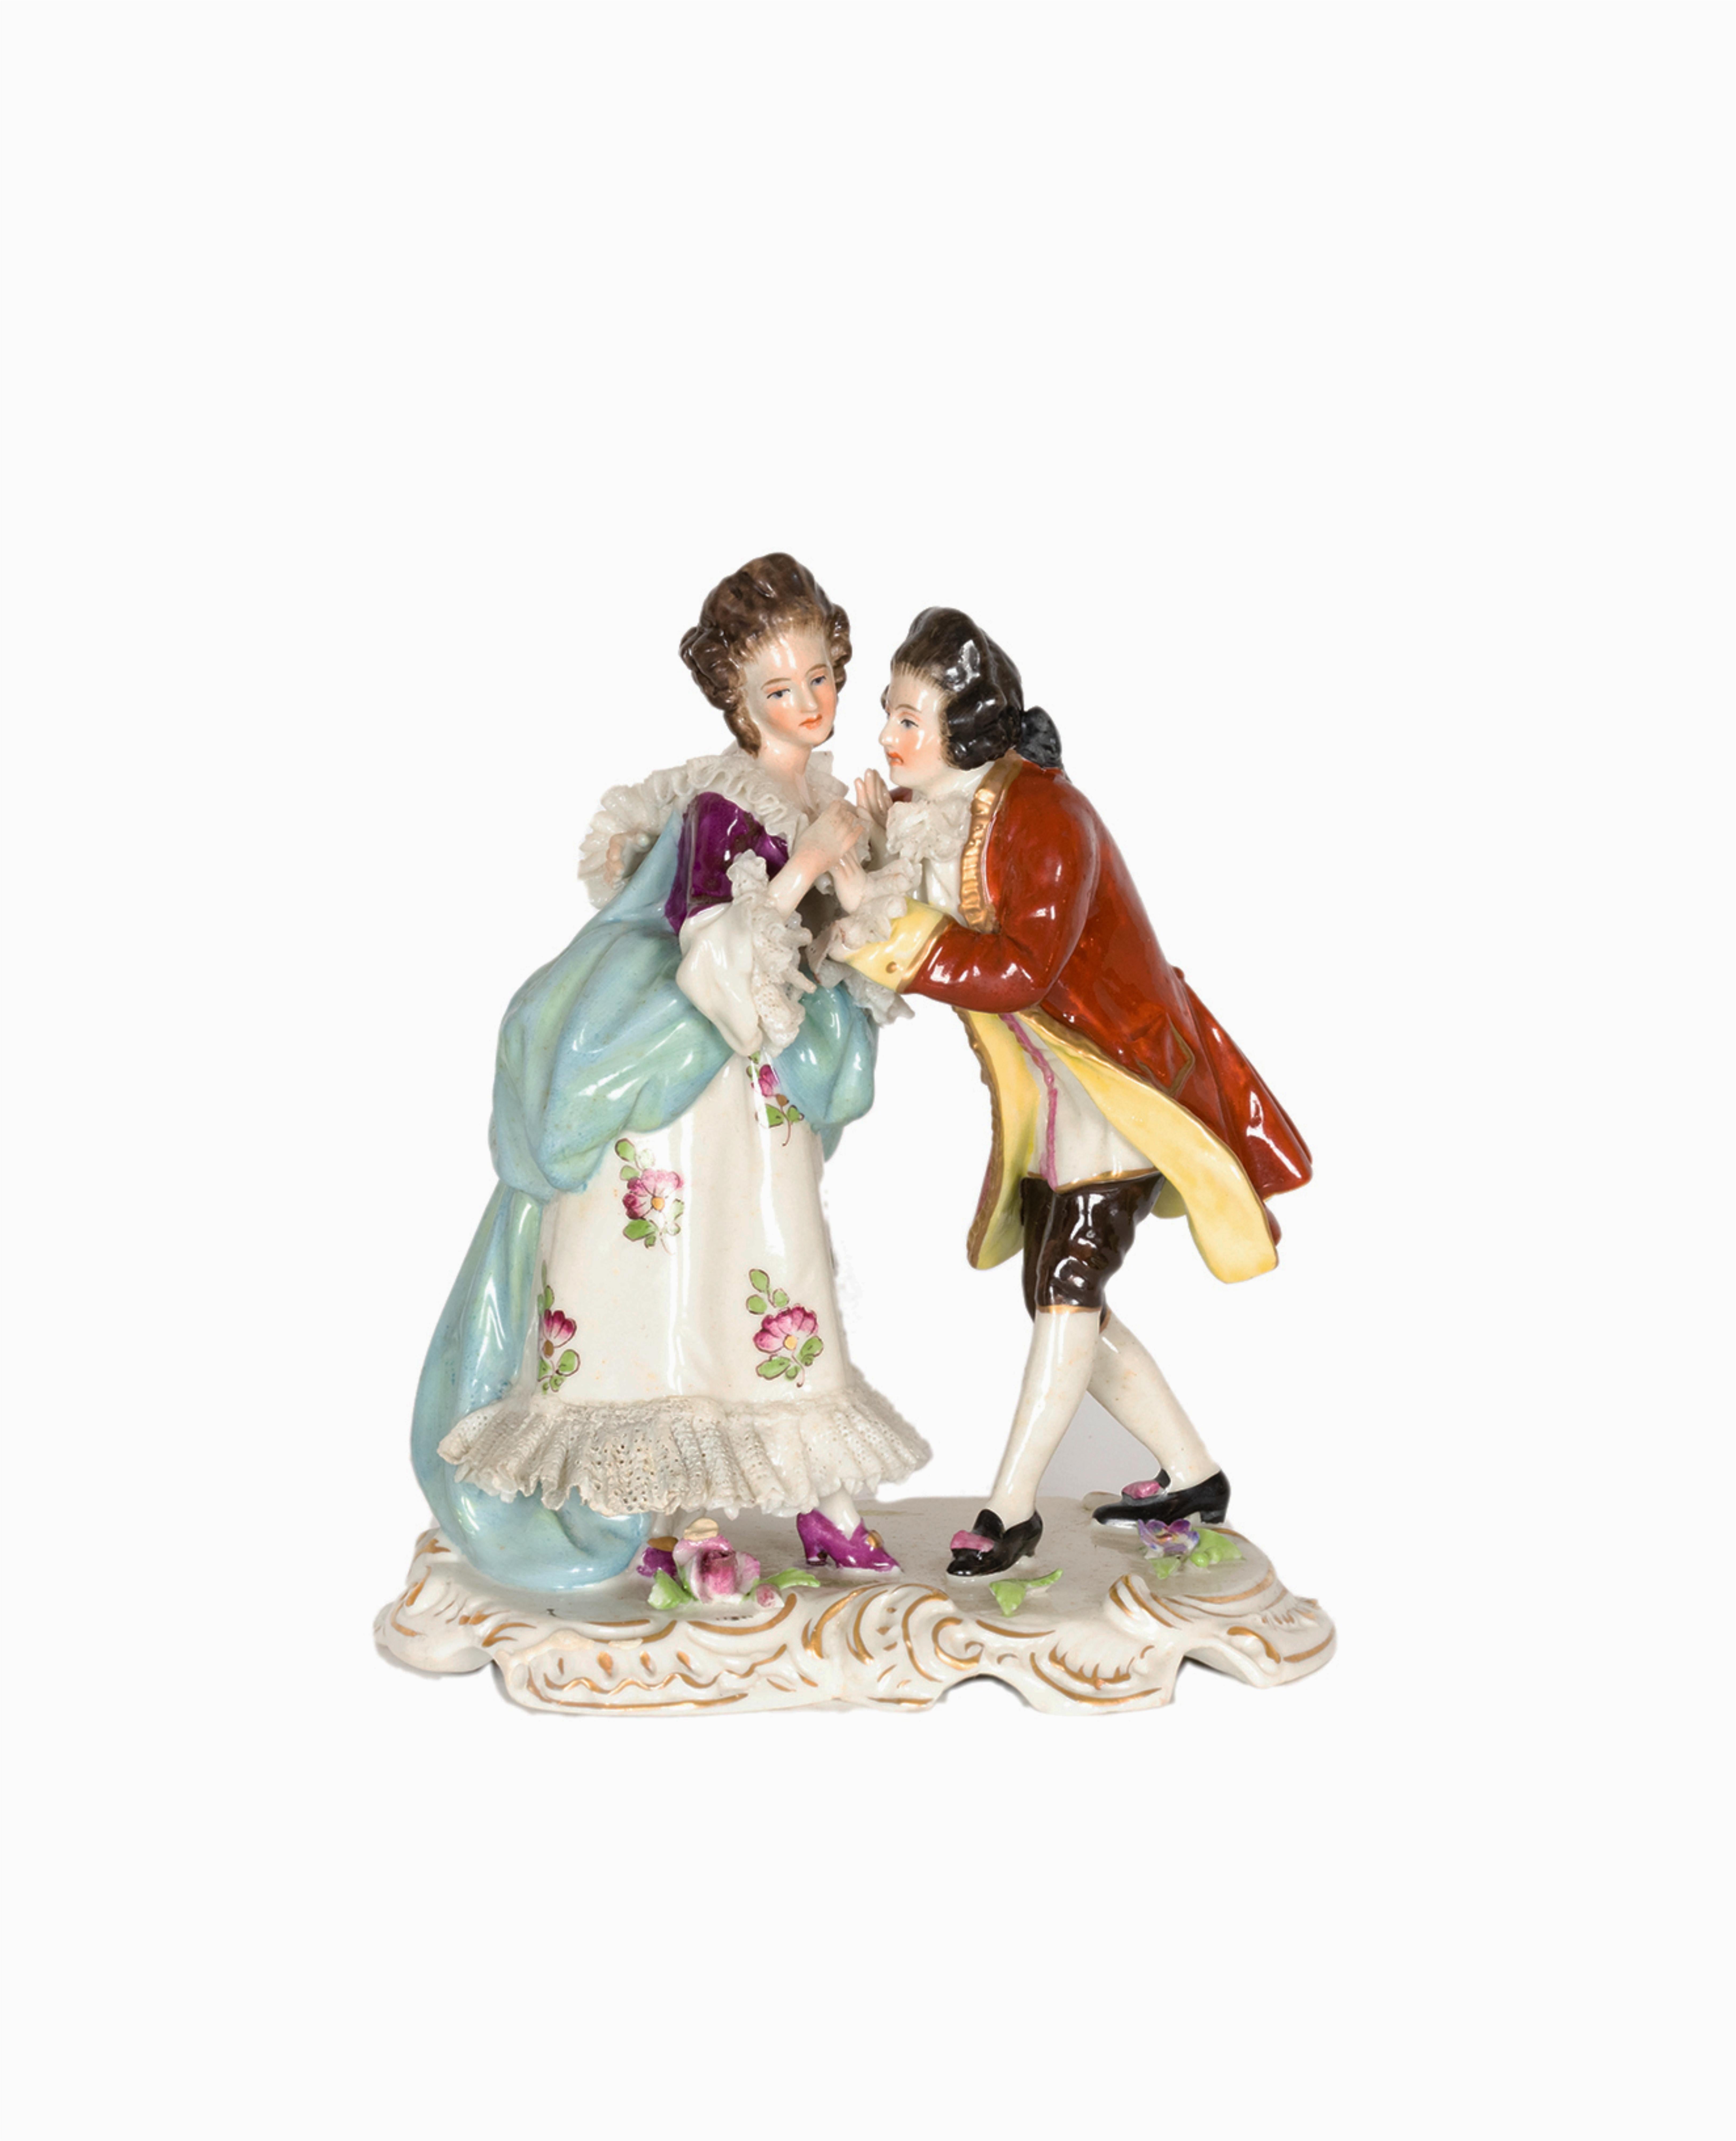 German Porcelain Figurine Of Loving Couple, Volkstedt, 19th Century  For Sale 1